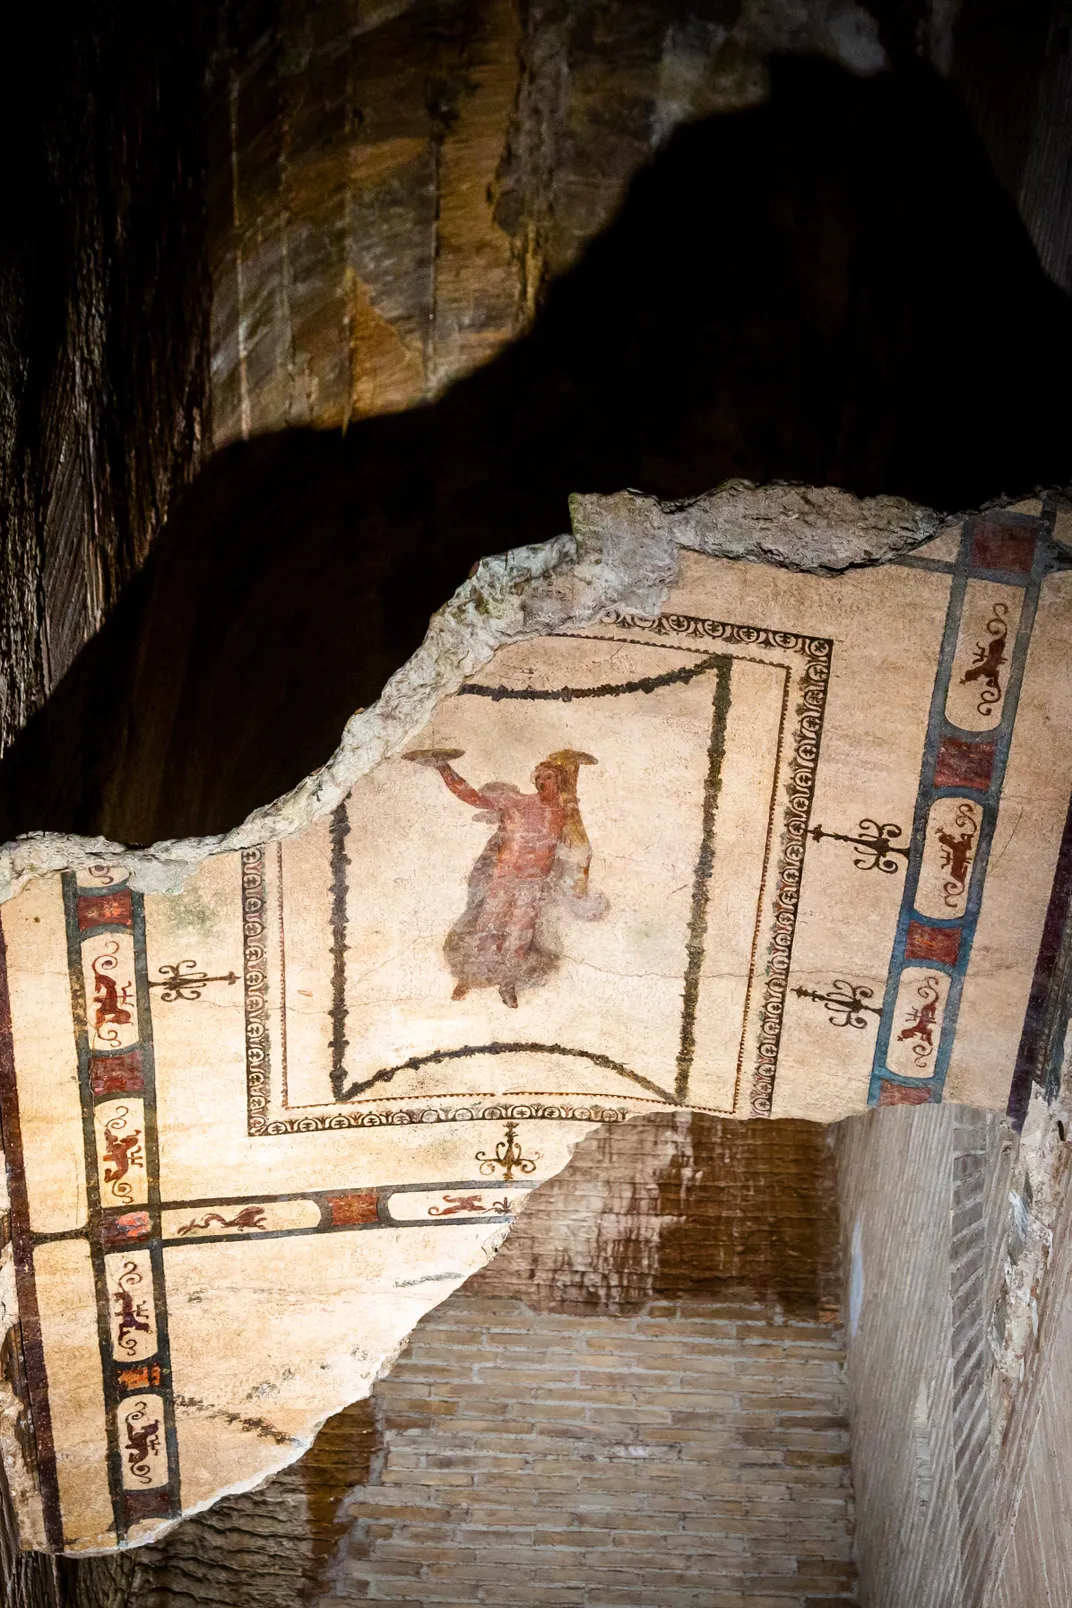  A frescoed gallery at the Domus Aurea